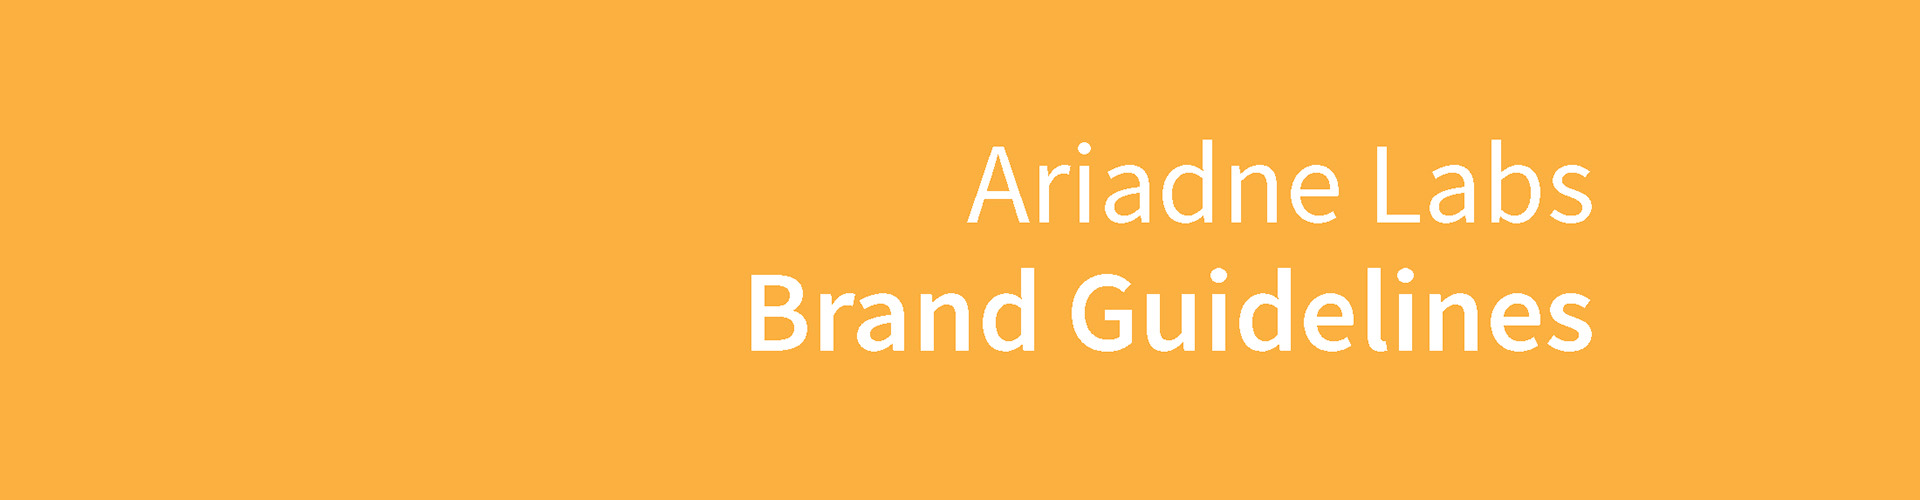 Ariadne Labs Brand Guidelines